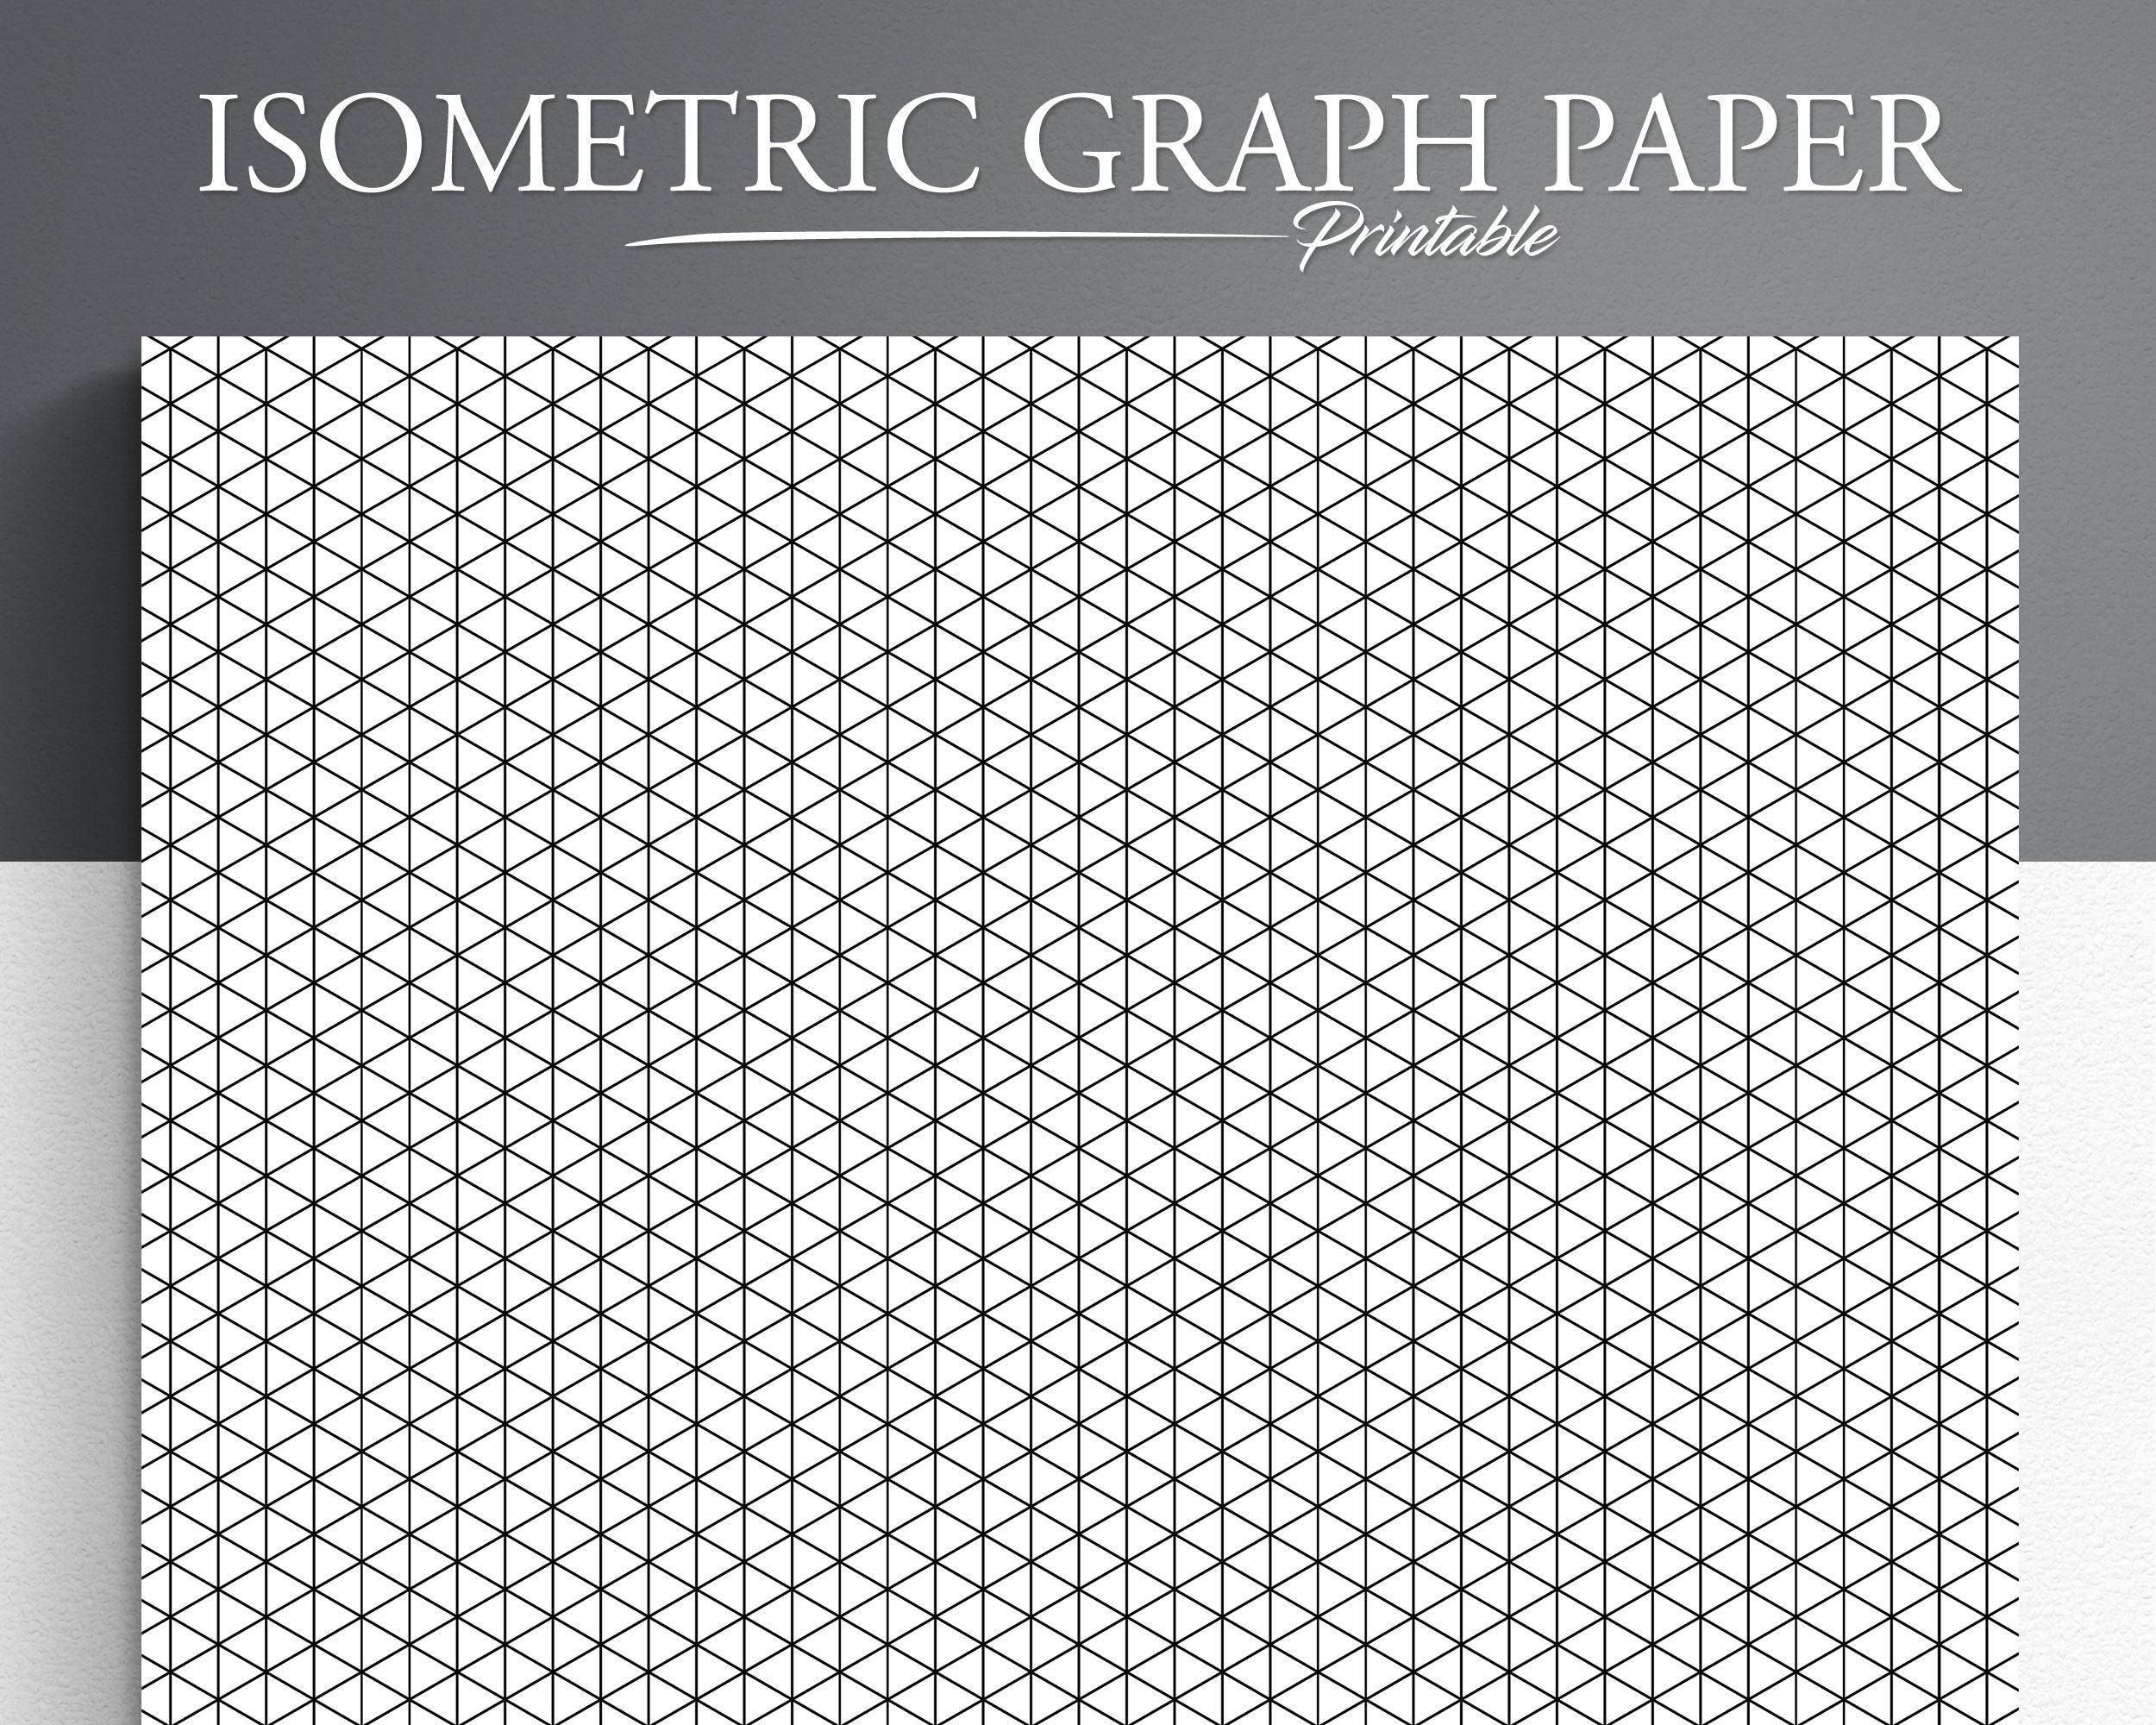 10 Pack of Large Sheet Format 10th of an Inch Graph Paper 24 X 18